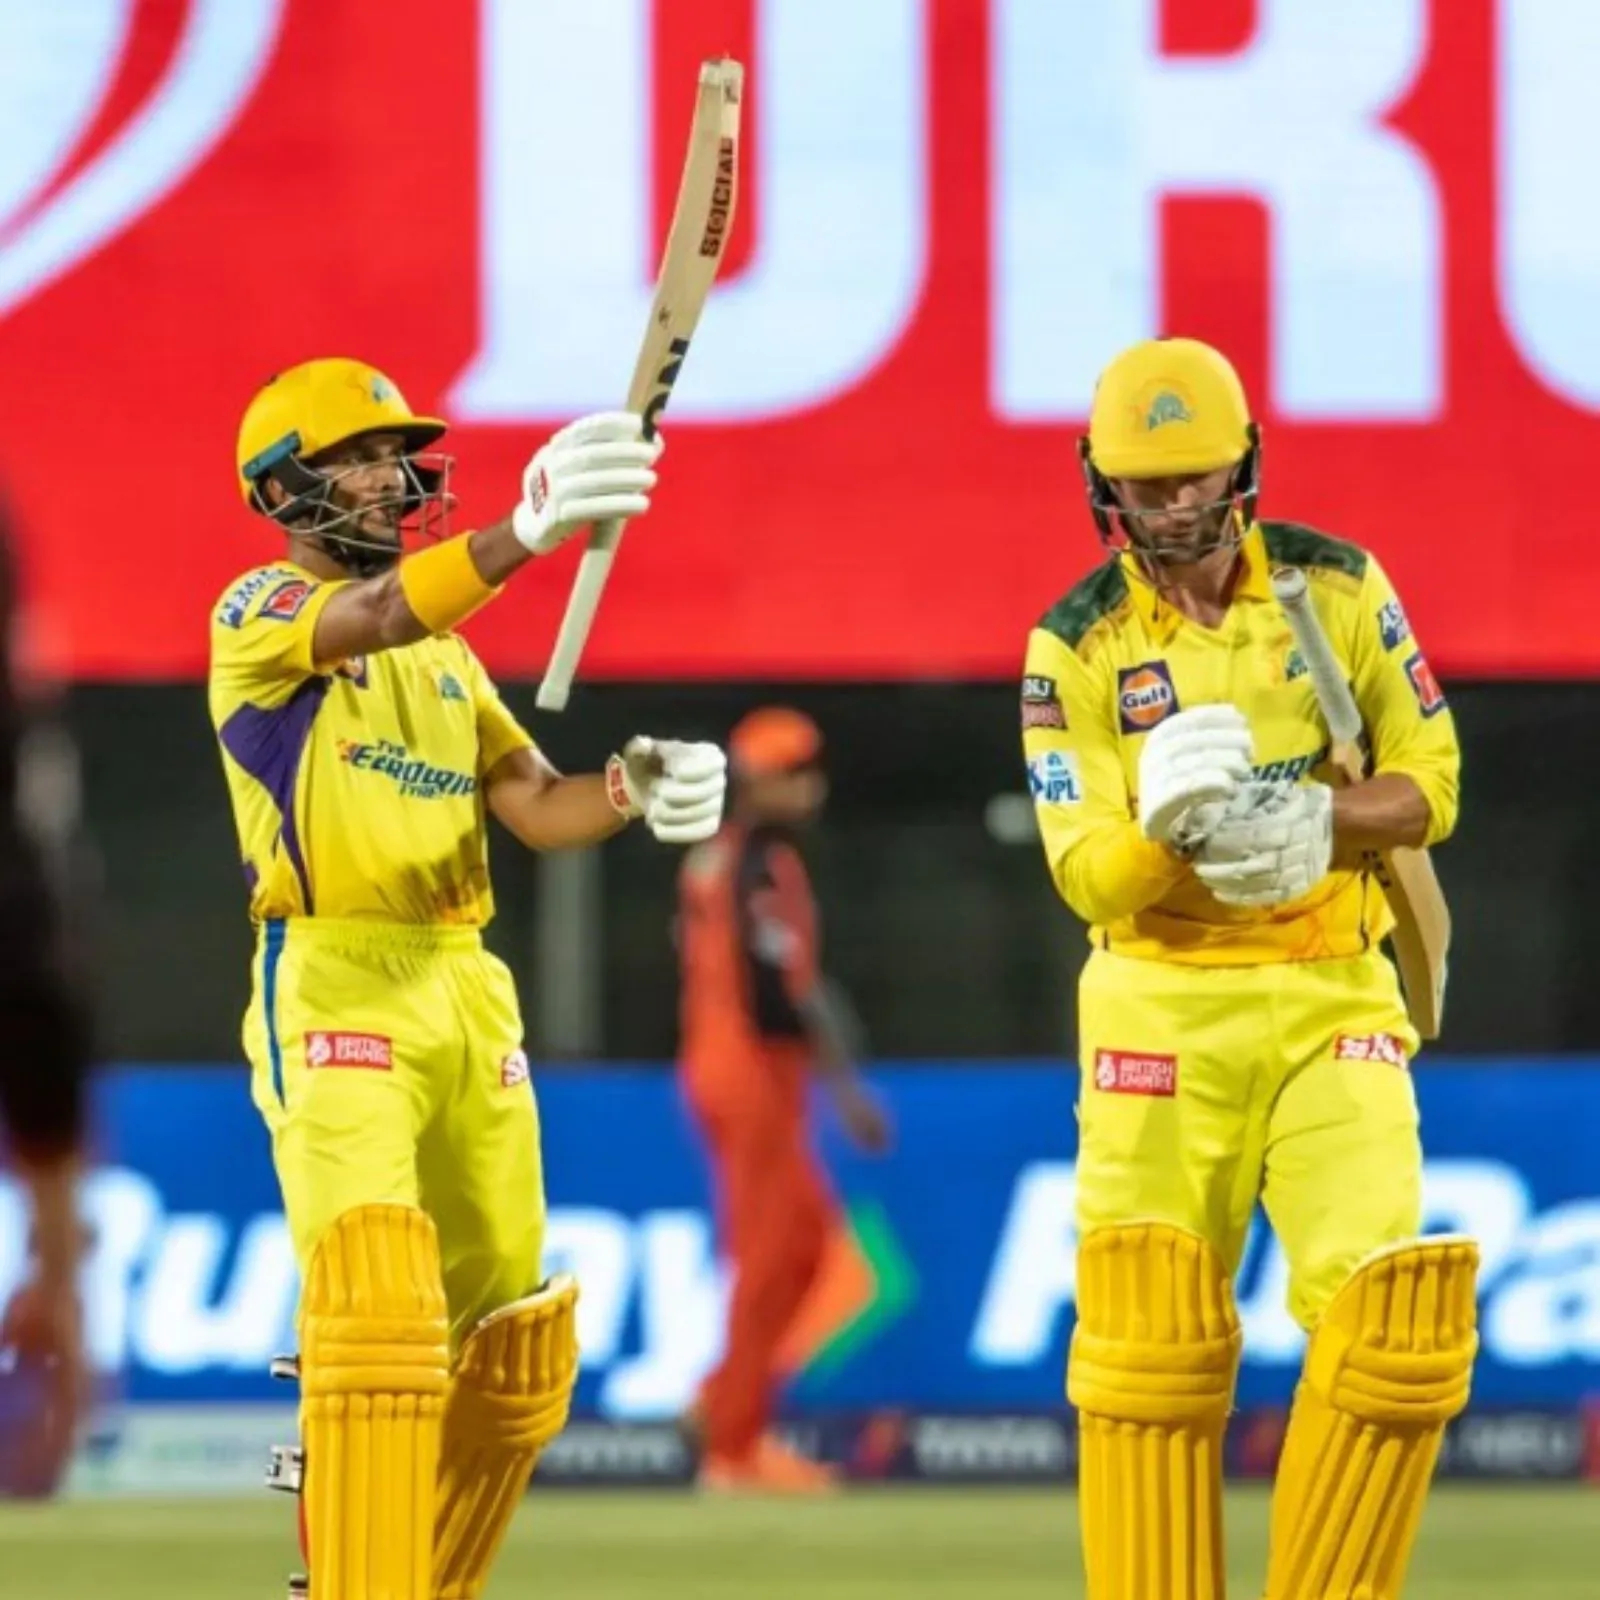 Gaikwad-Conway broke highest opening partnership record for CSK | BCCI-IPL